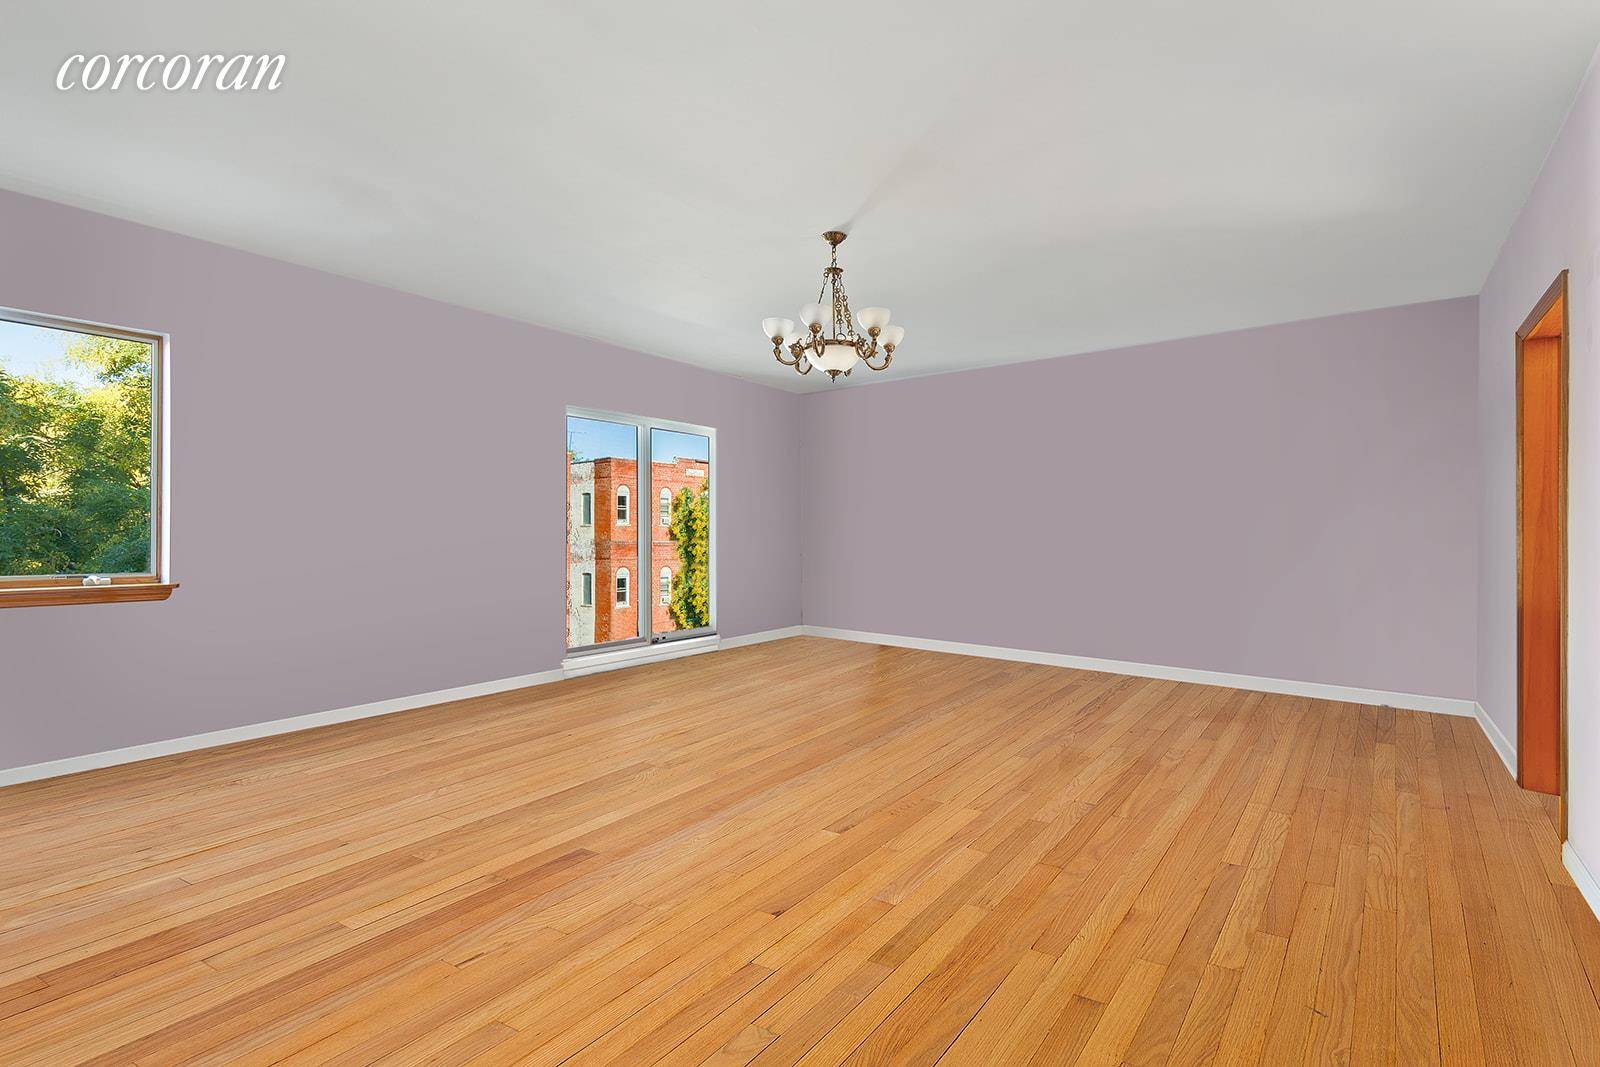 Situated on a quiet tree lined street, this large 3 bedroom ; 2 full baths condo is the most affordable place to call home in Bensonhurst.